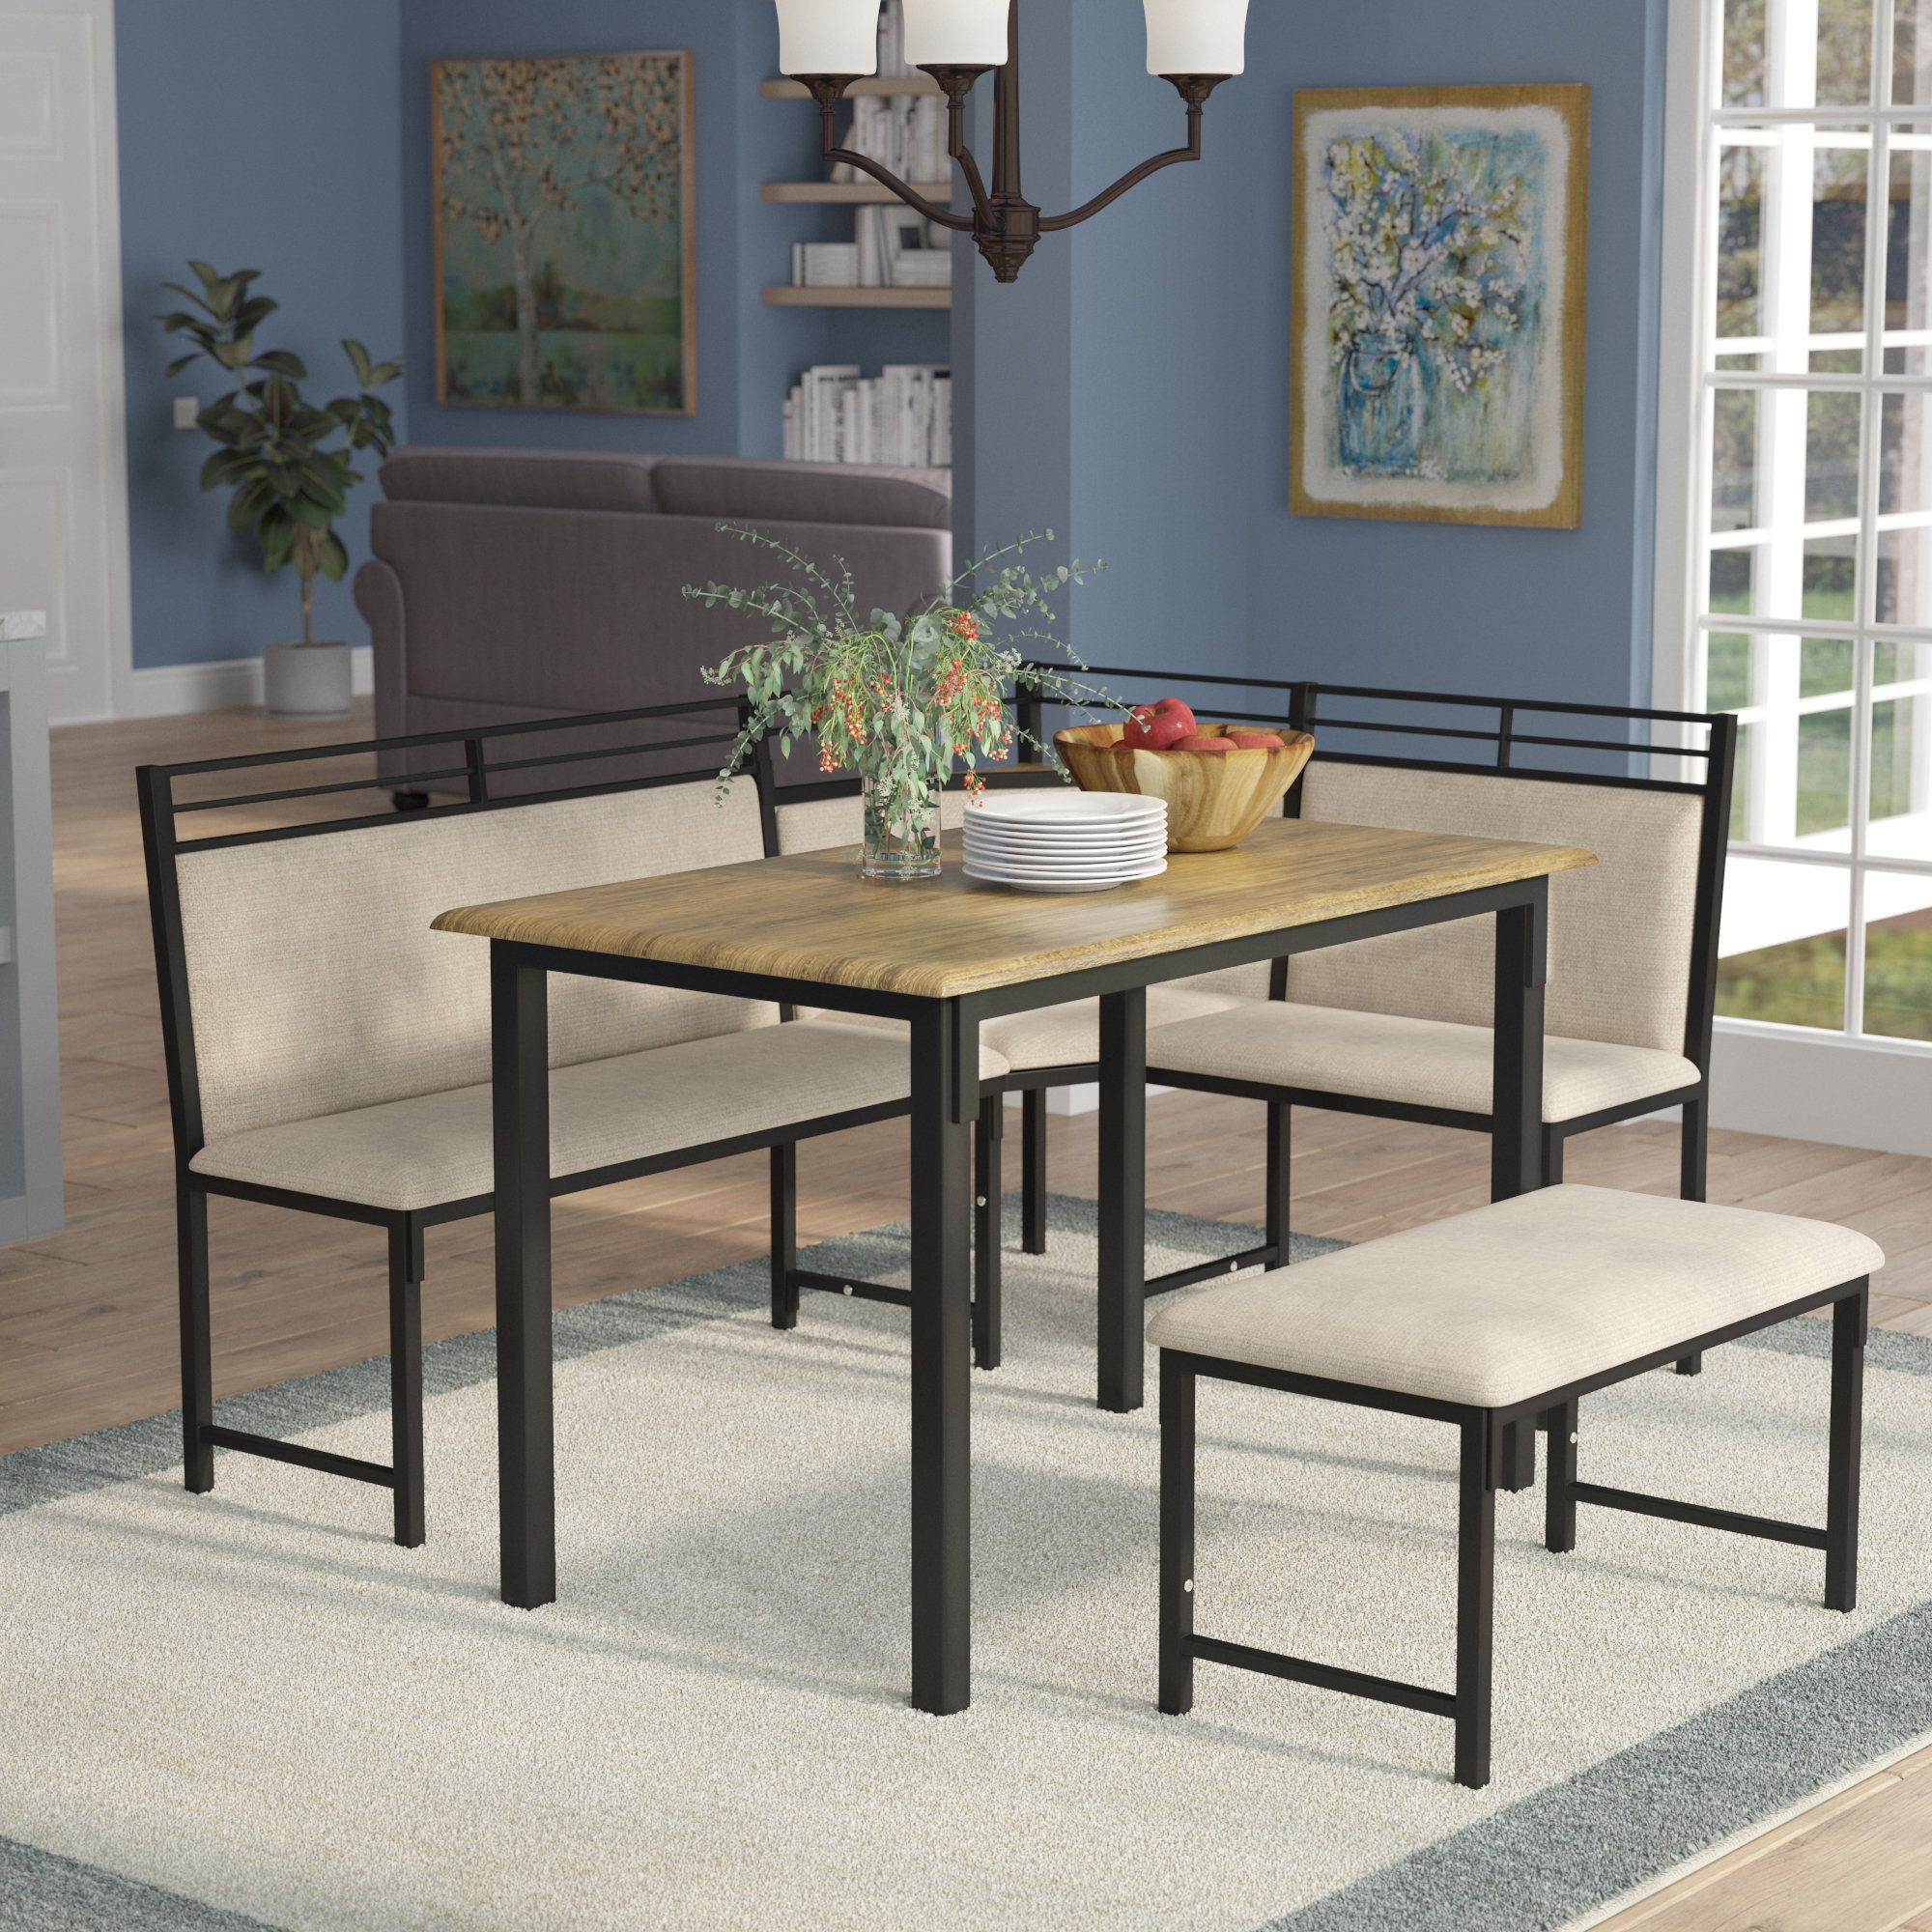 Most Current Frida 3 Piece Dining Table Sets With Regard To Red Barrel Studio Moonachie Corner 3 Piece Dining Set & Reviews (View 6 of 20)